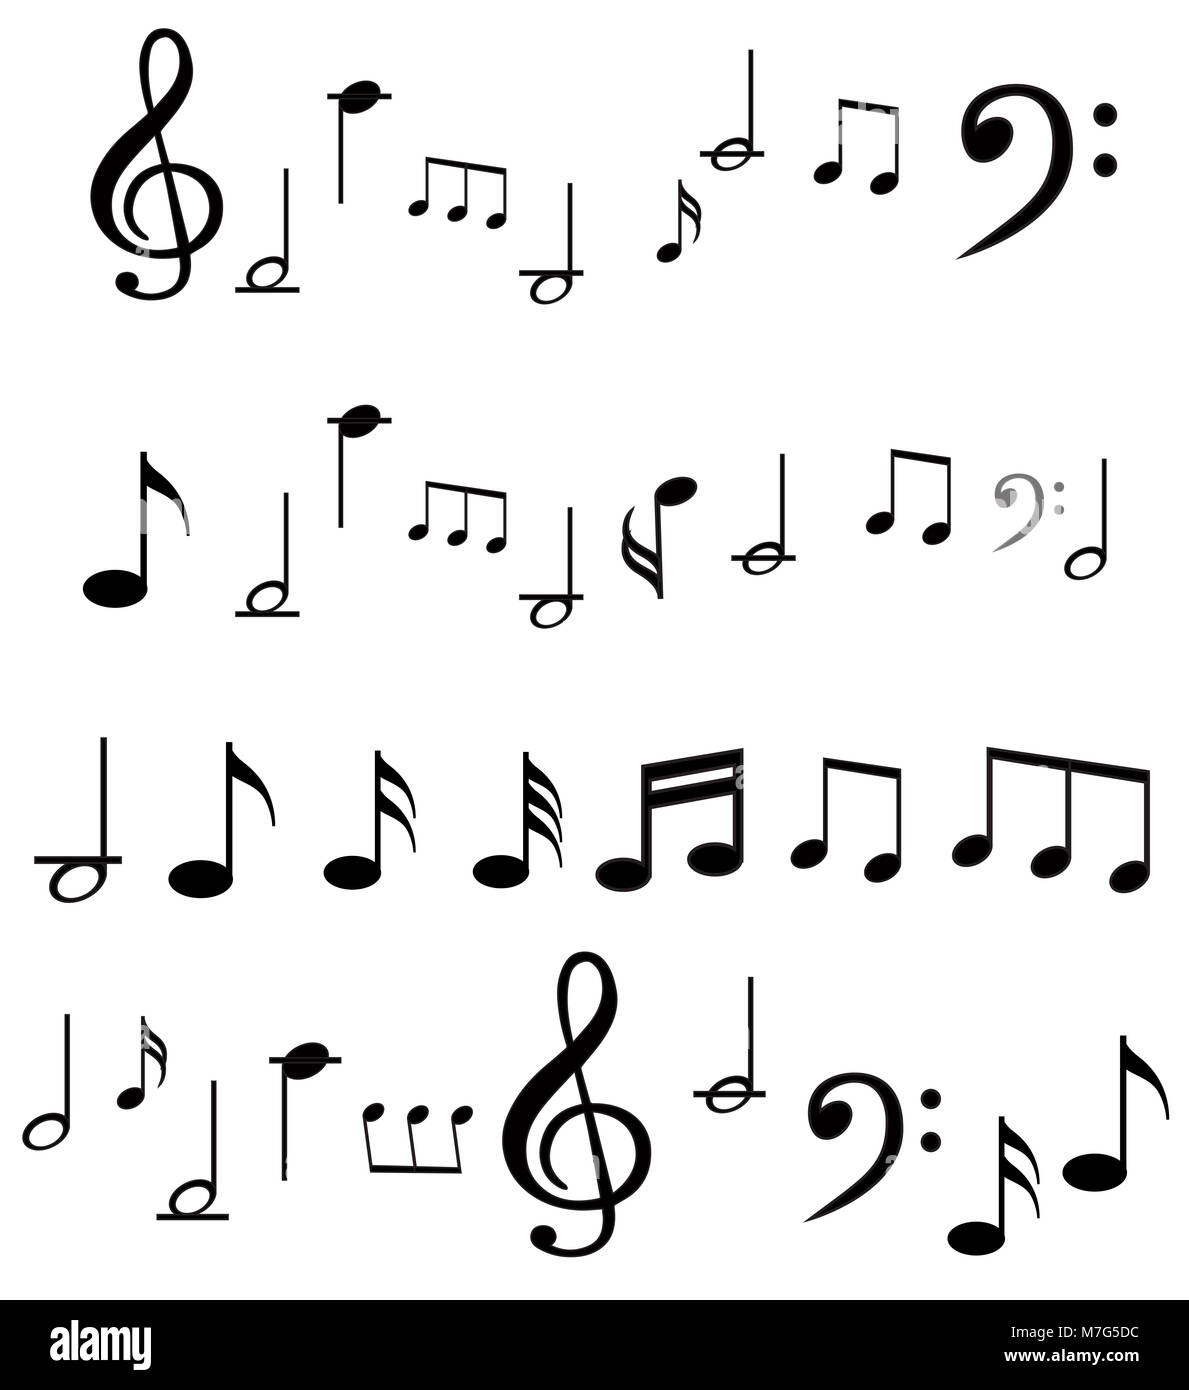 Music note background with different music symbols Stock Photo - Alamy